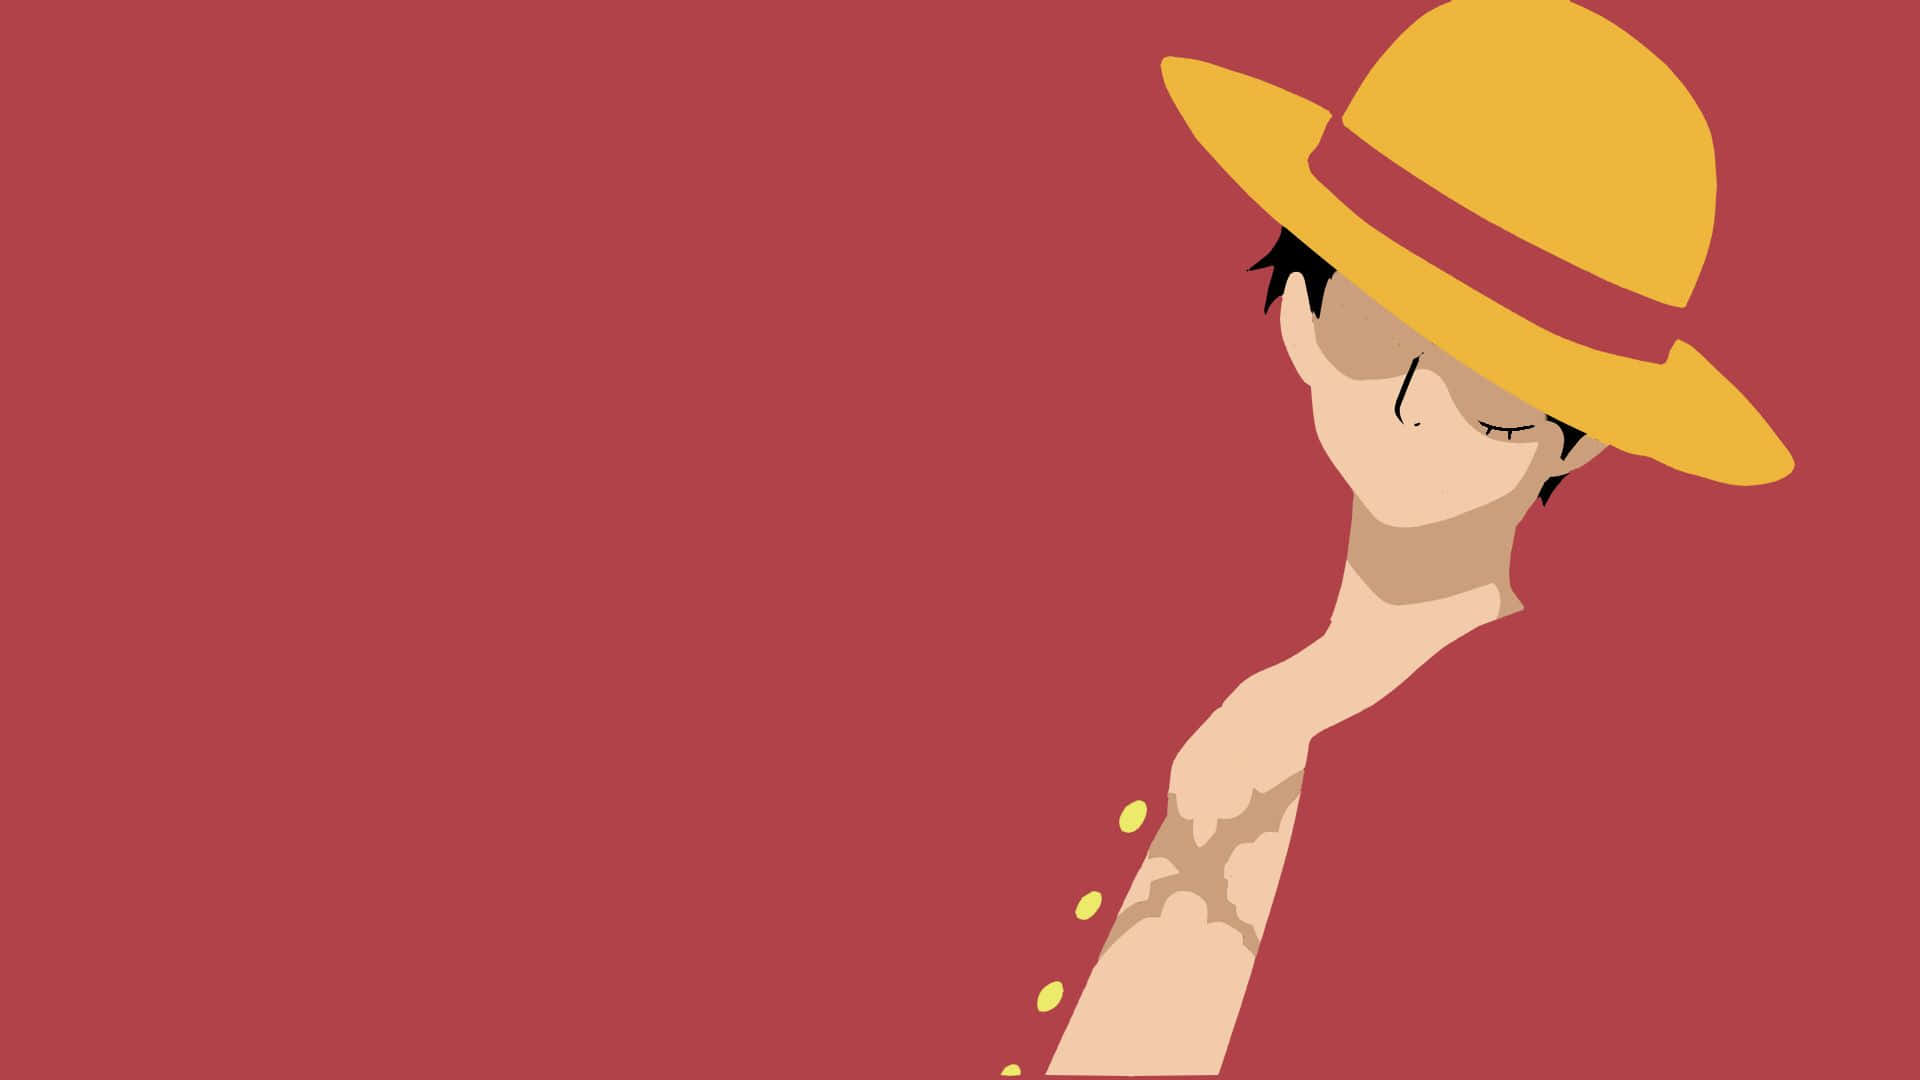 Minimalist Aesthetic of One Piece Anime Character Wallpaper